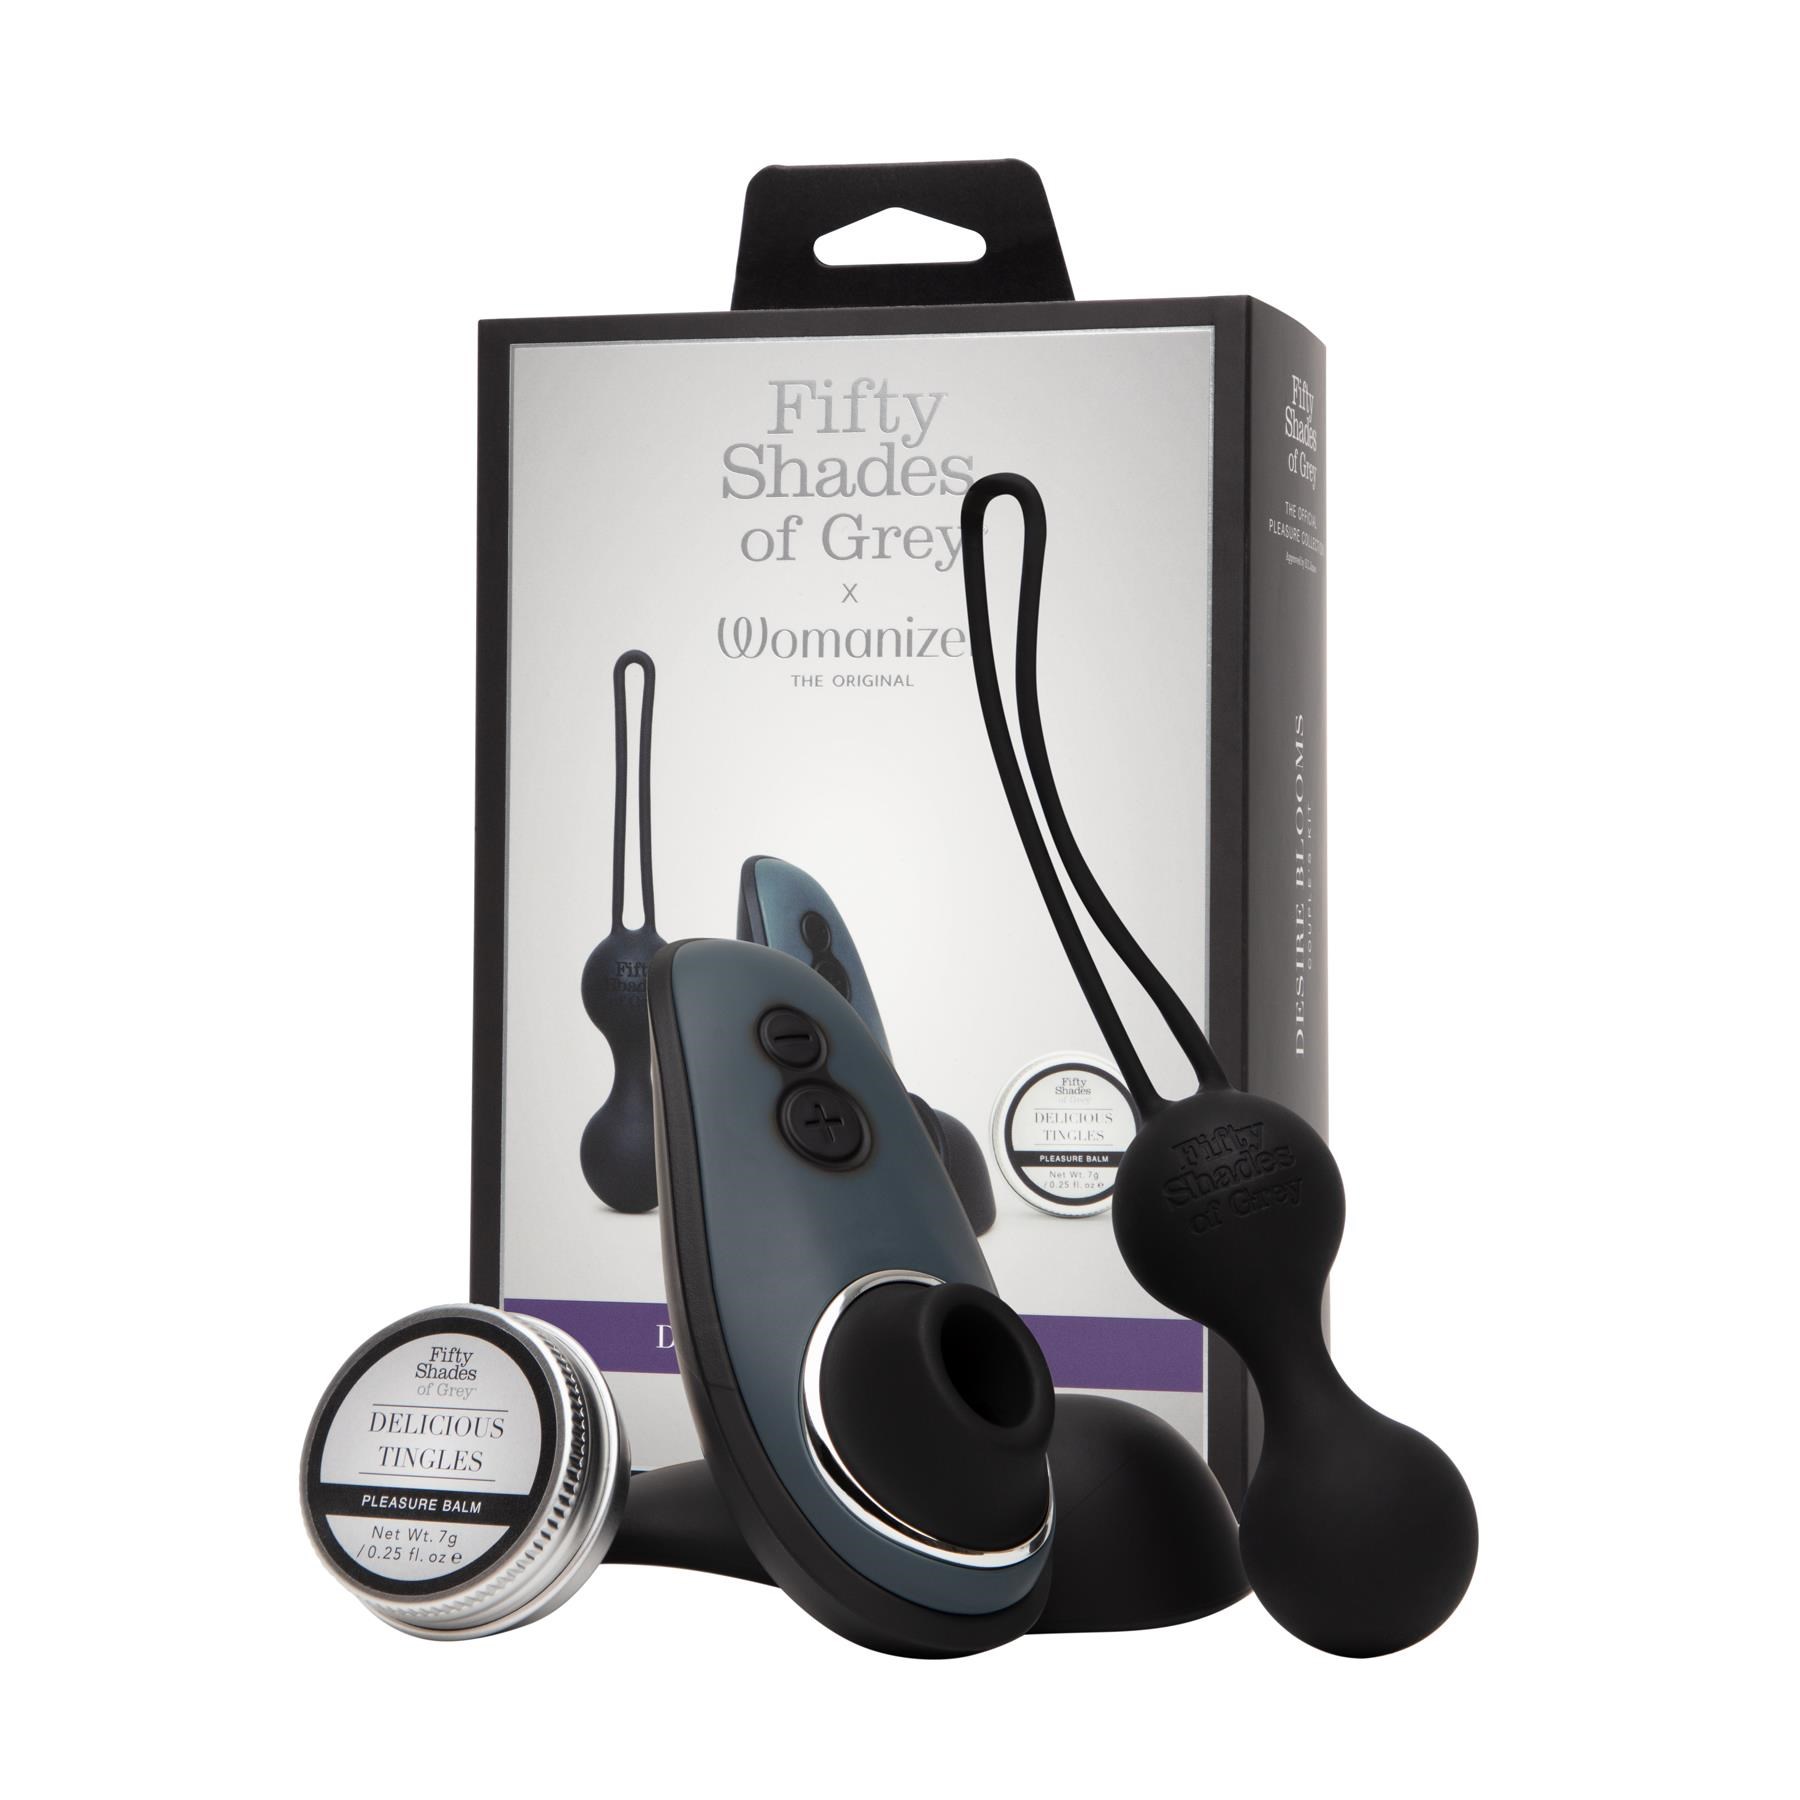 Fifty Shades of Grey & Womanizer Desire Blooms Couples Kit - All Components and Packaging